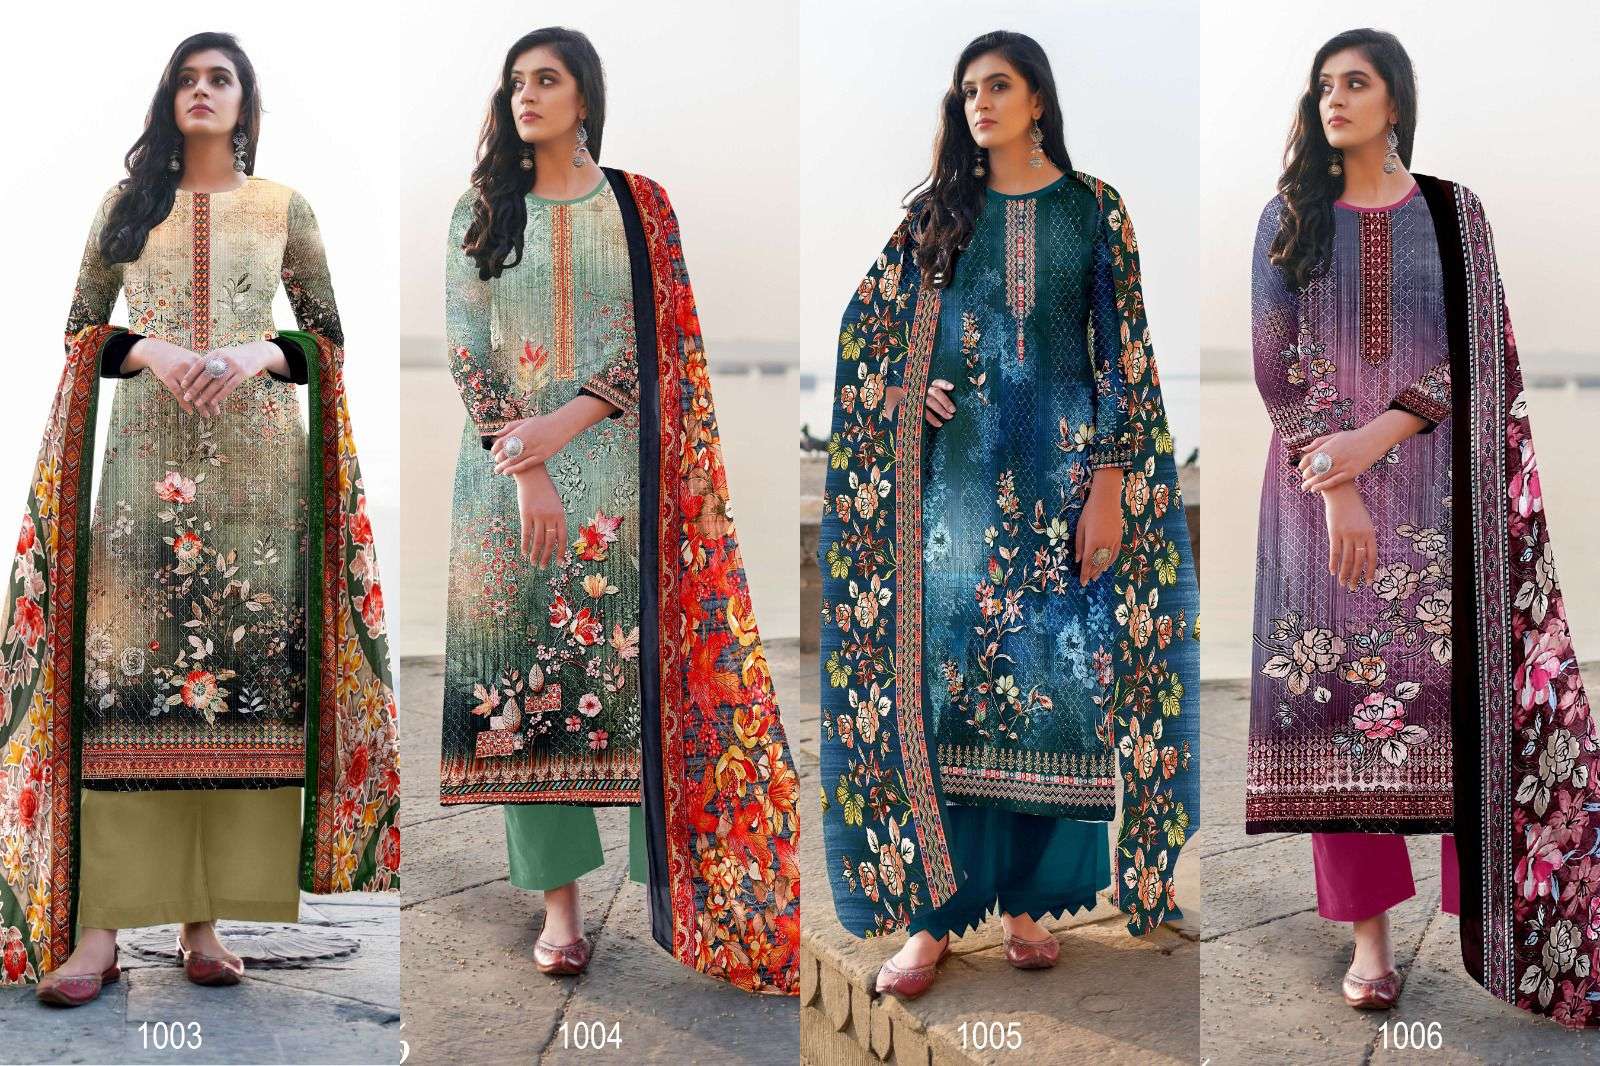 Starlight By Shree Shanti Creation 1001 To 1008 Series Designer Festive Suits Beautiful Fancy Stylish Colorful Party Wear & Occasional Wear Pure Cotton Print With Embroidery Dresses At Wholesale Price